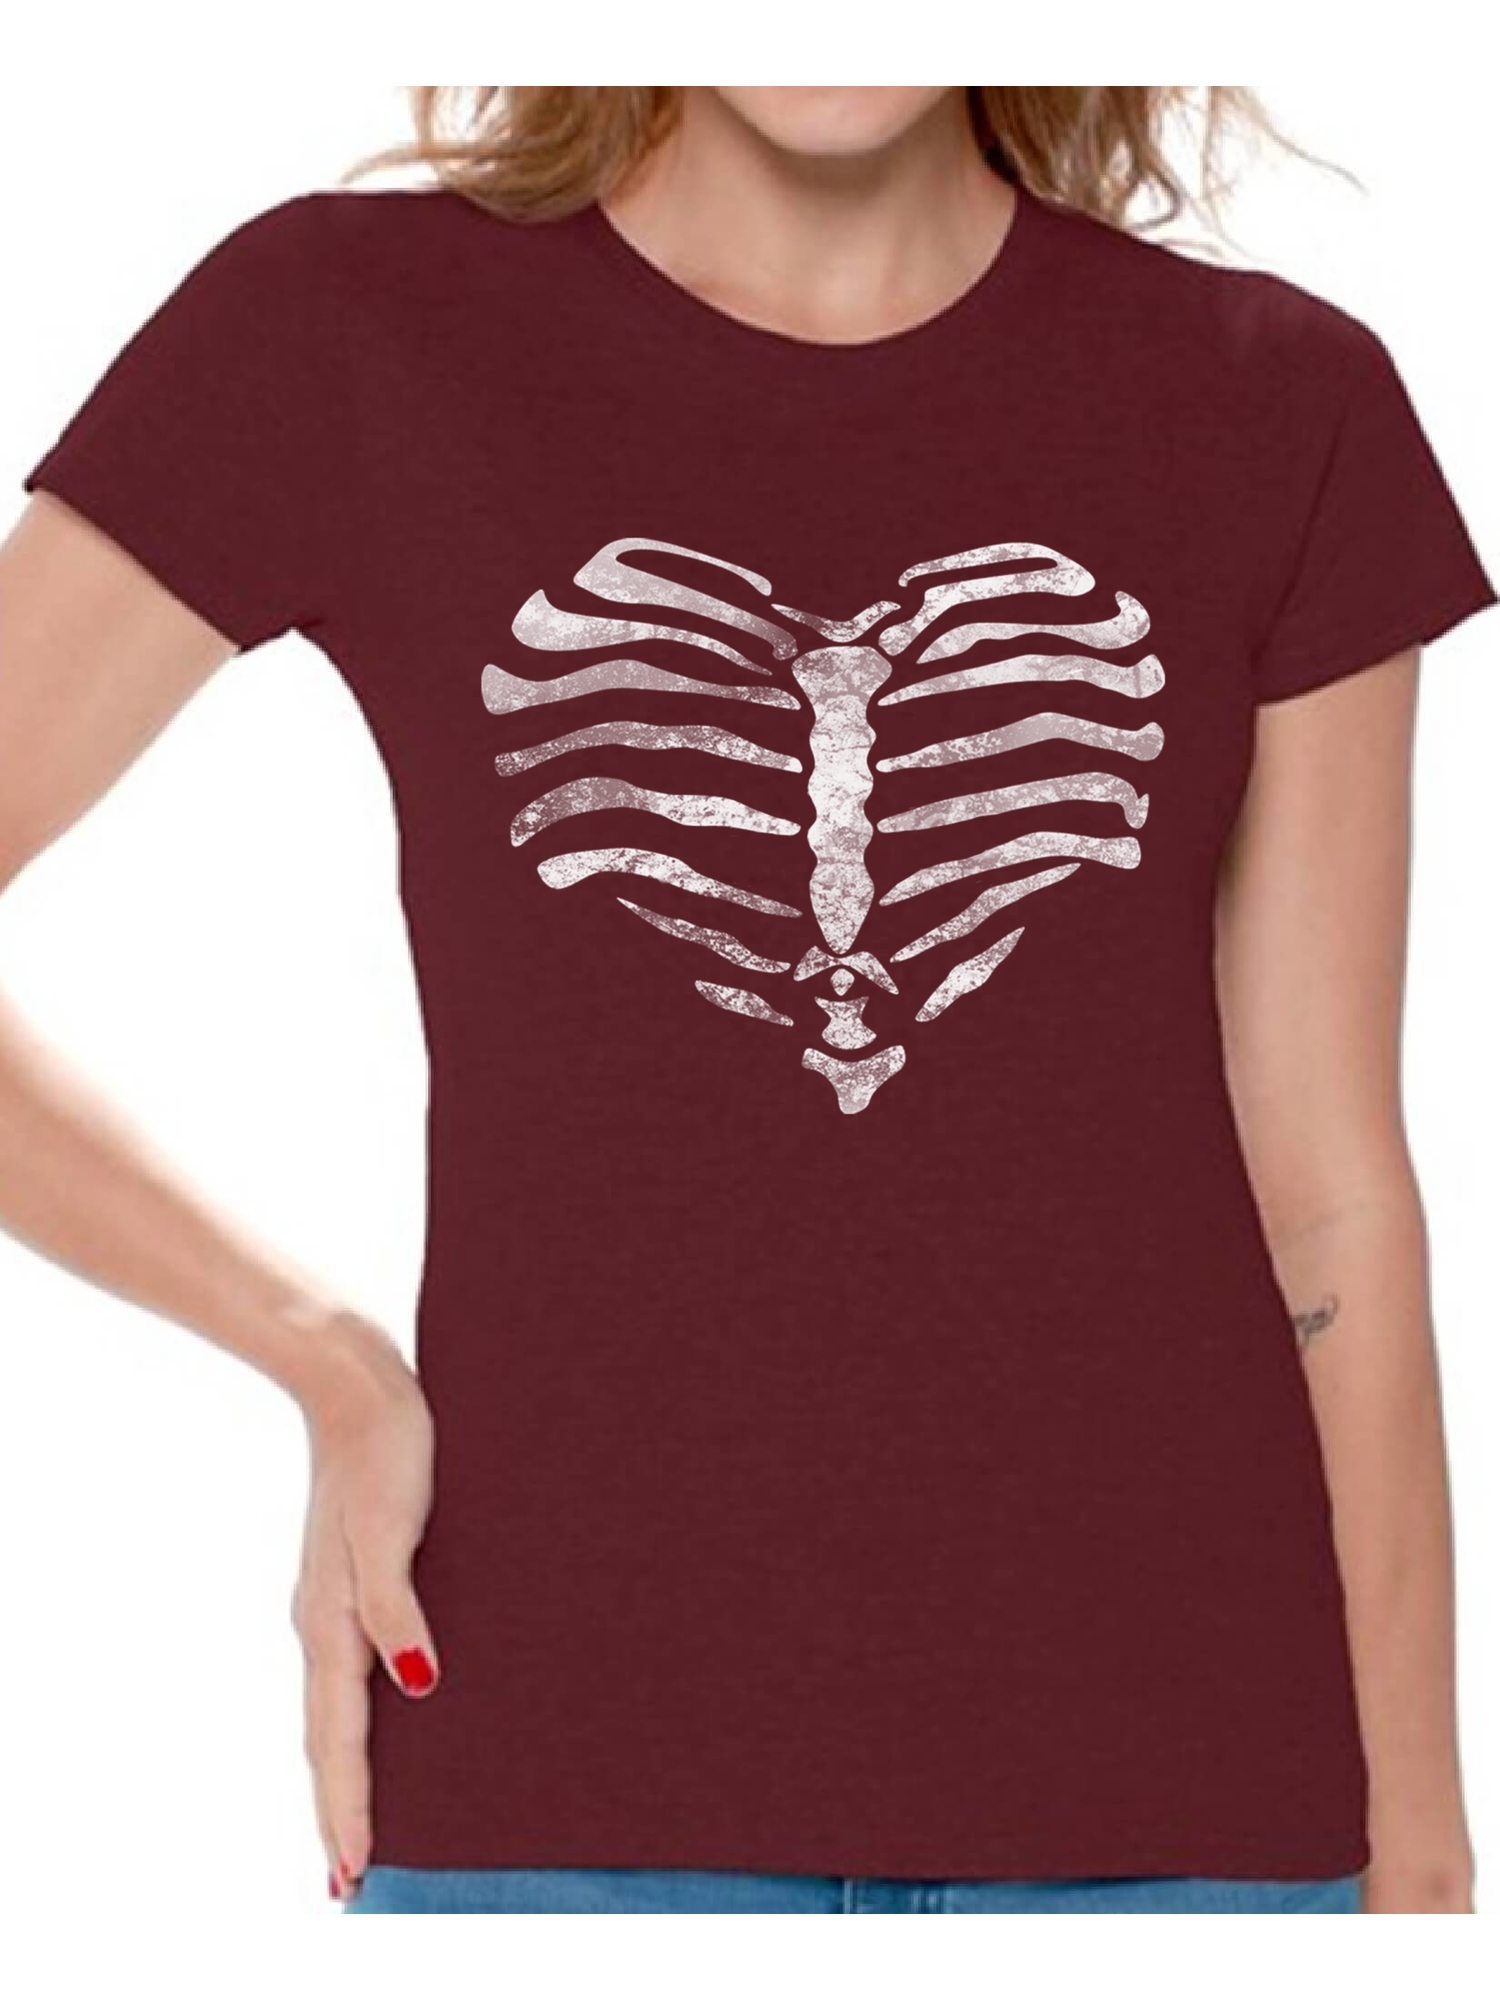 Awkward Styles Women's Heart Ribcage Graphic T-shirt Tops Skeleton Ribcage Day of Dead Halloween - image 1 of 4